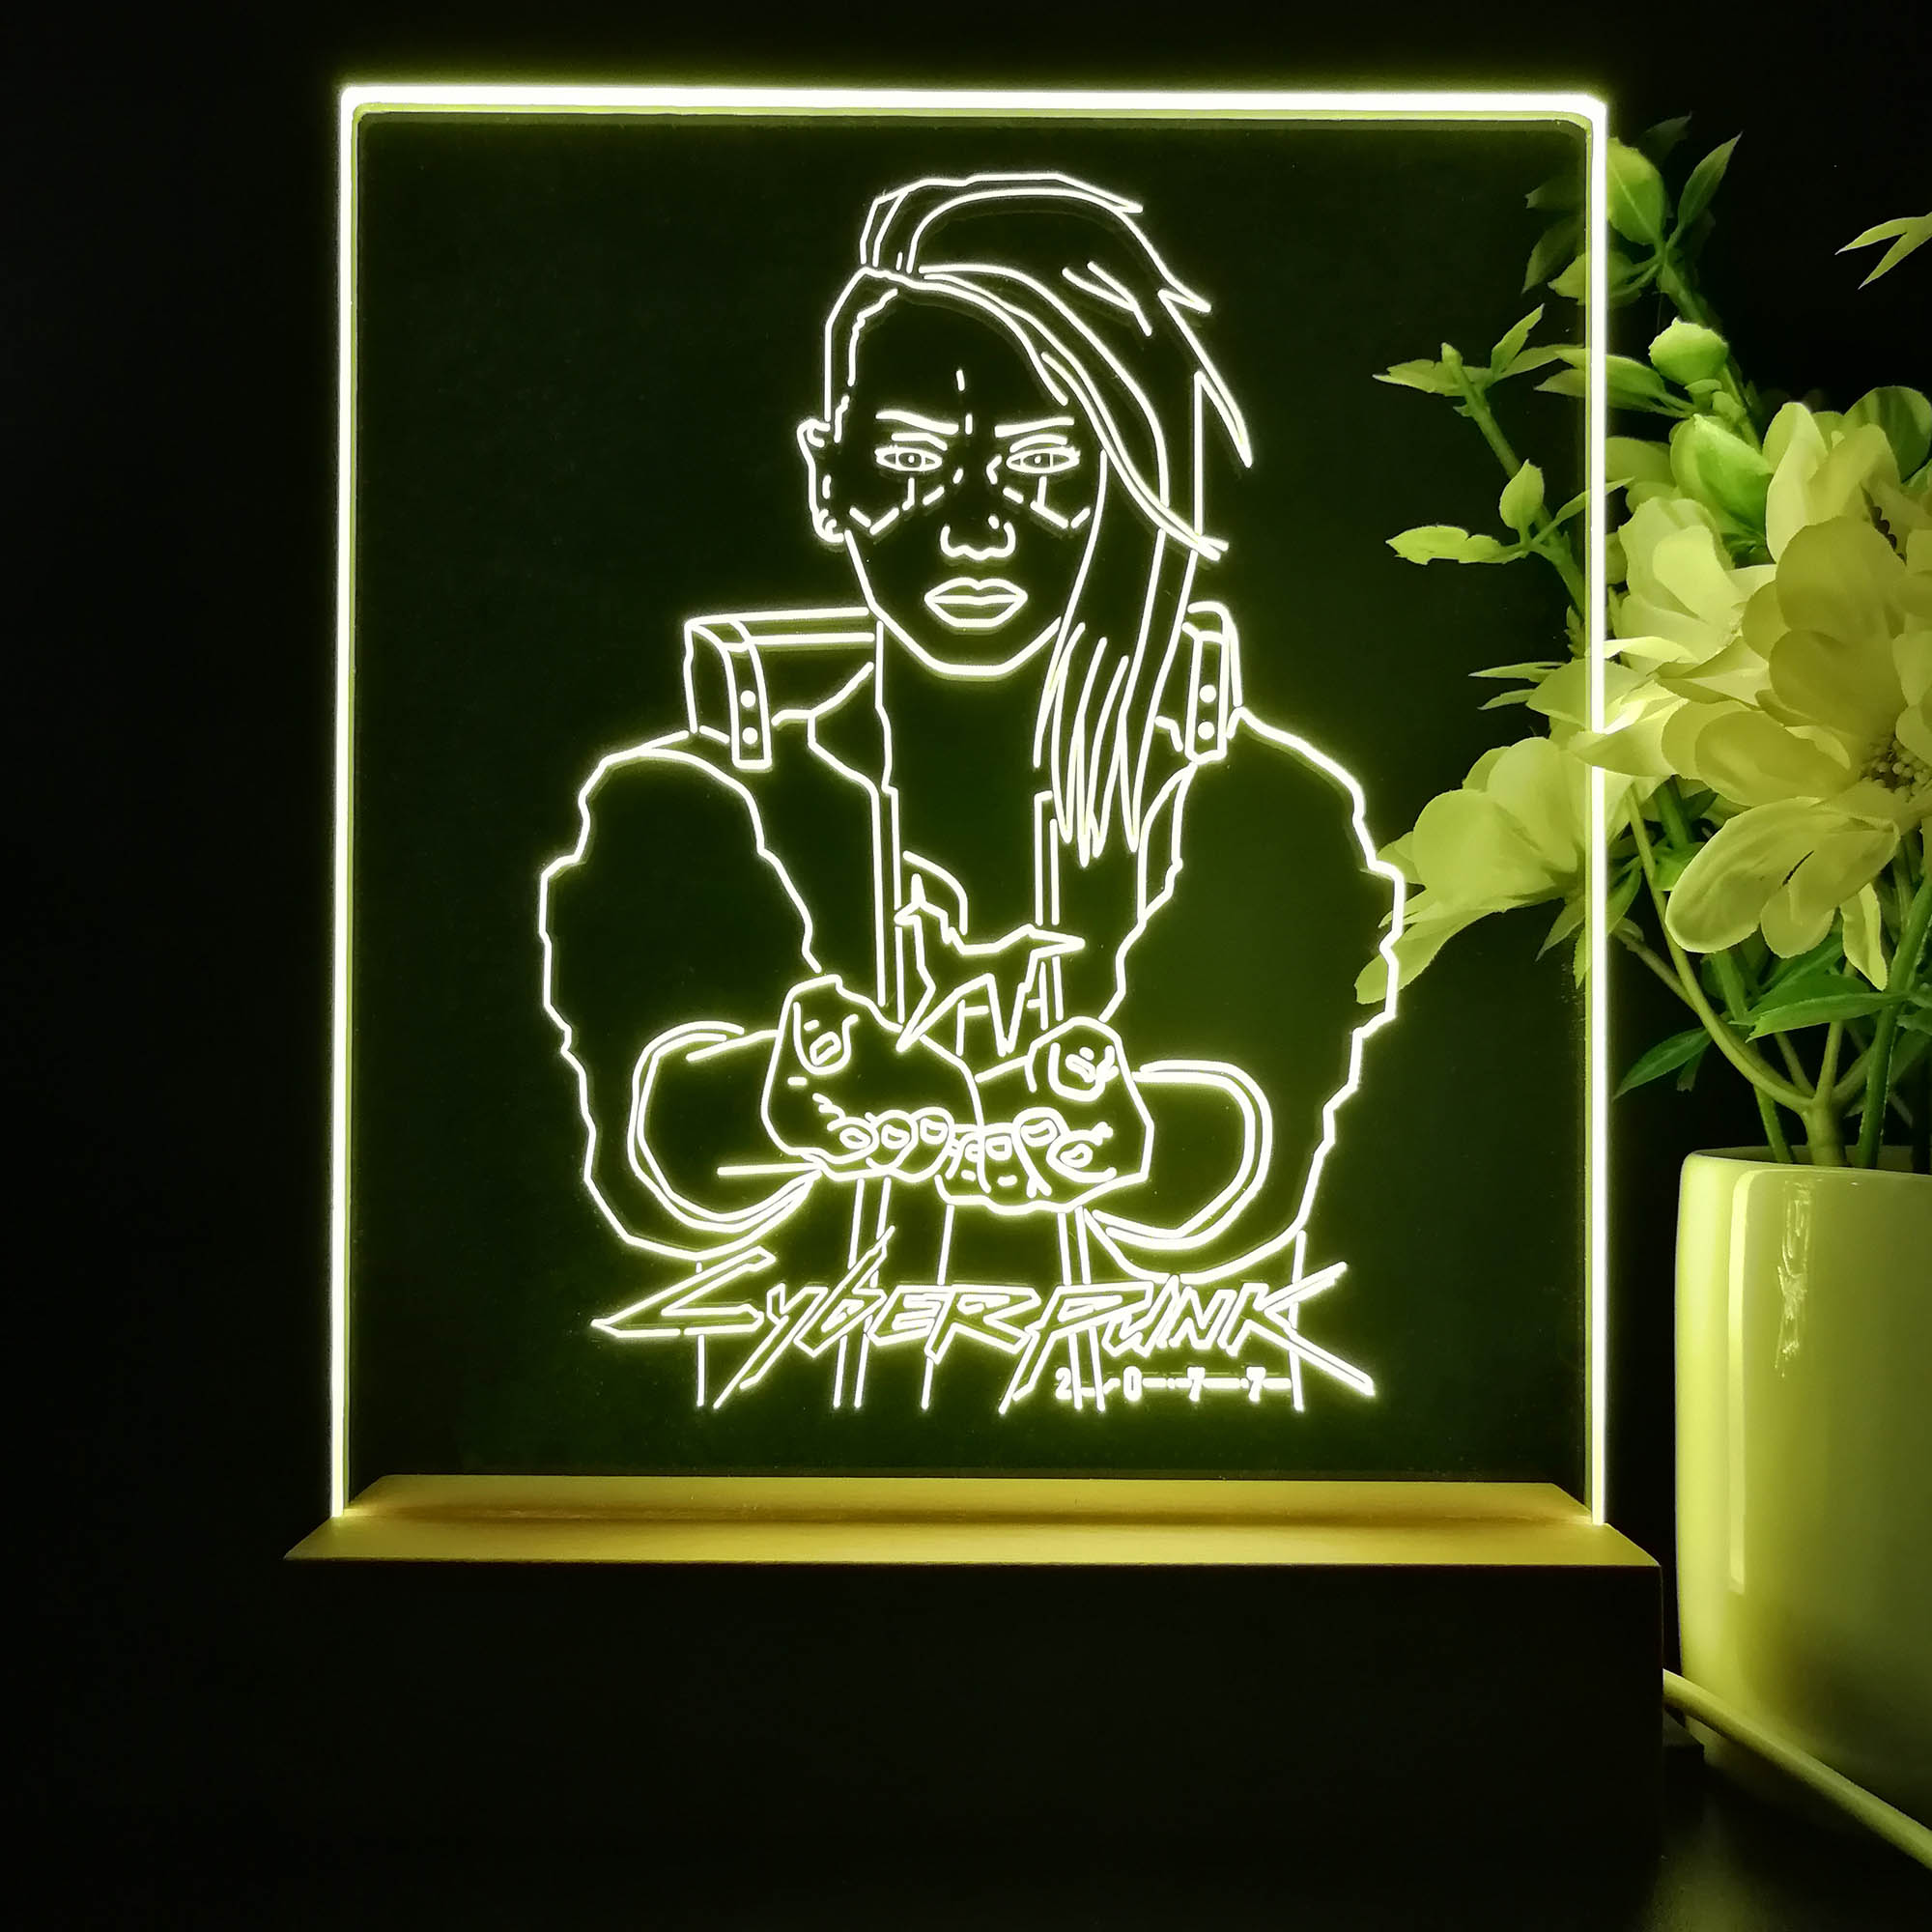 Cyberpunk 2077 Johnny Game Room LED Sign Lamp Display